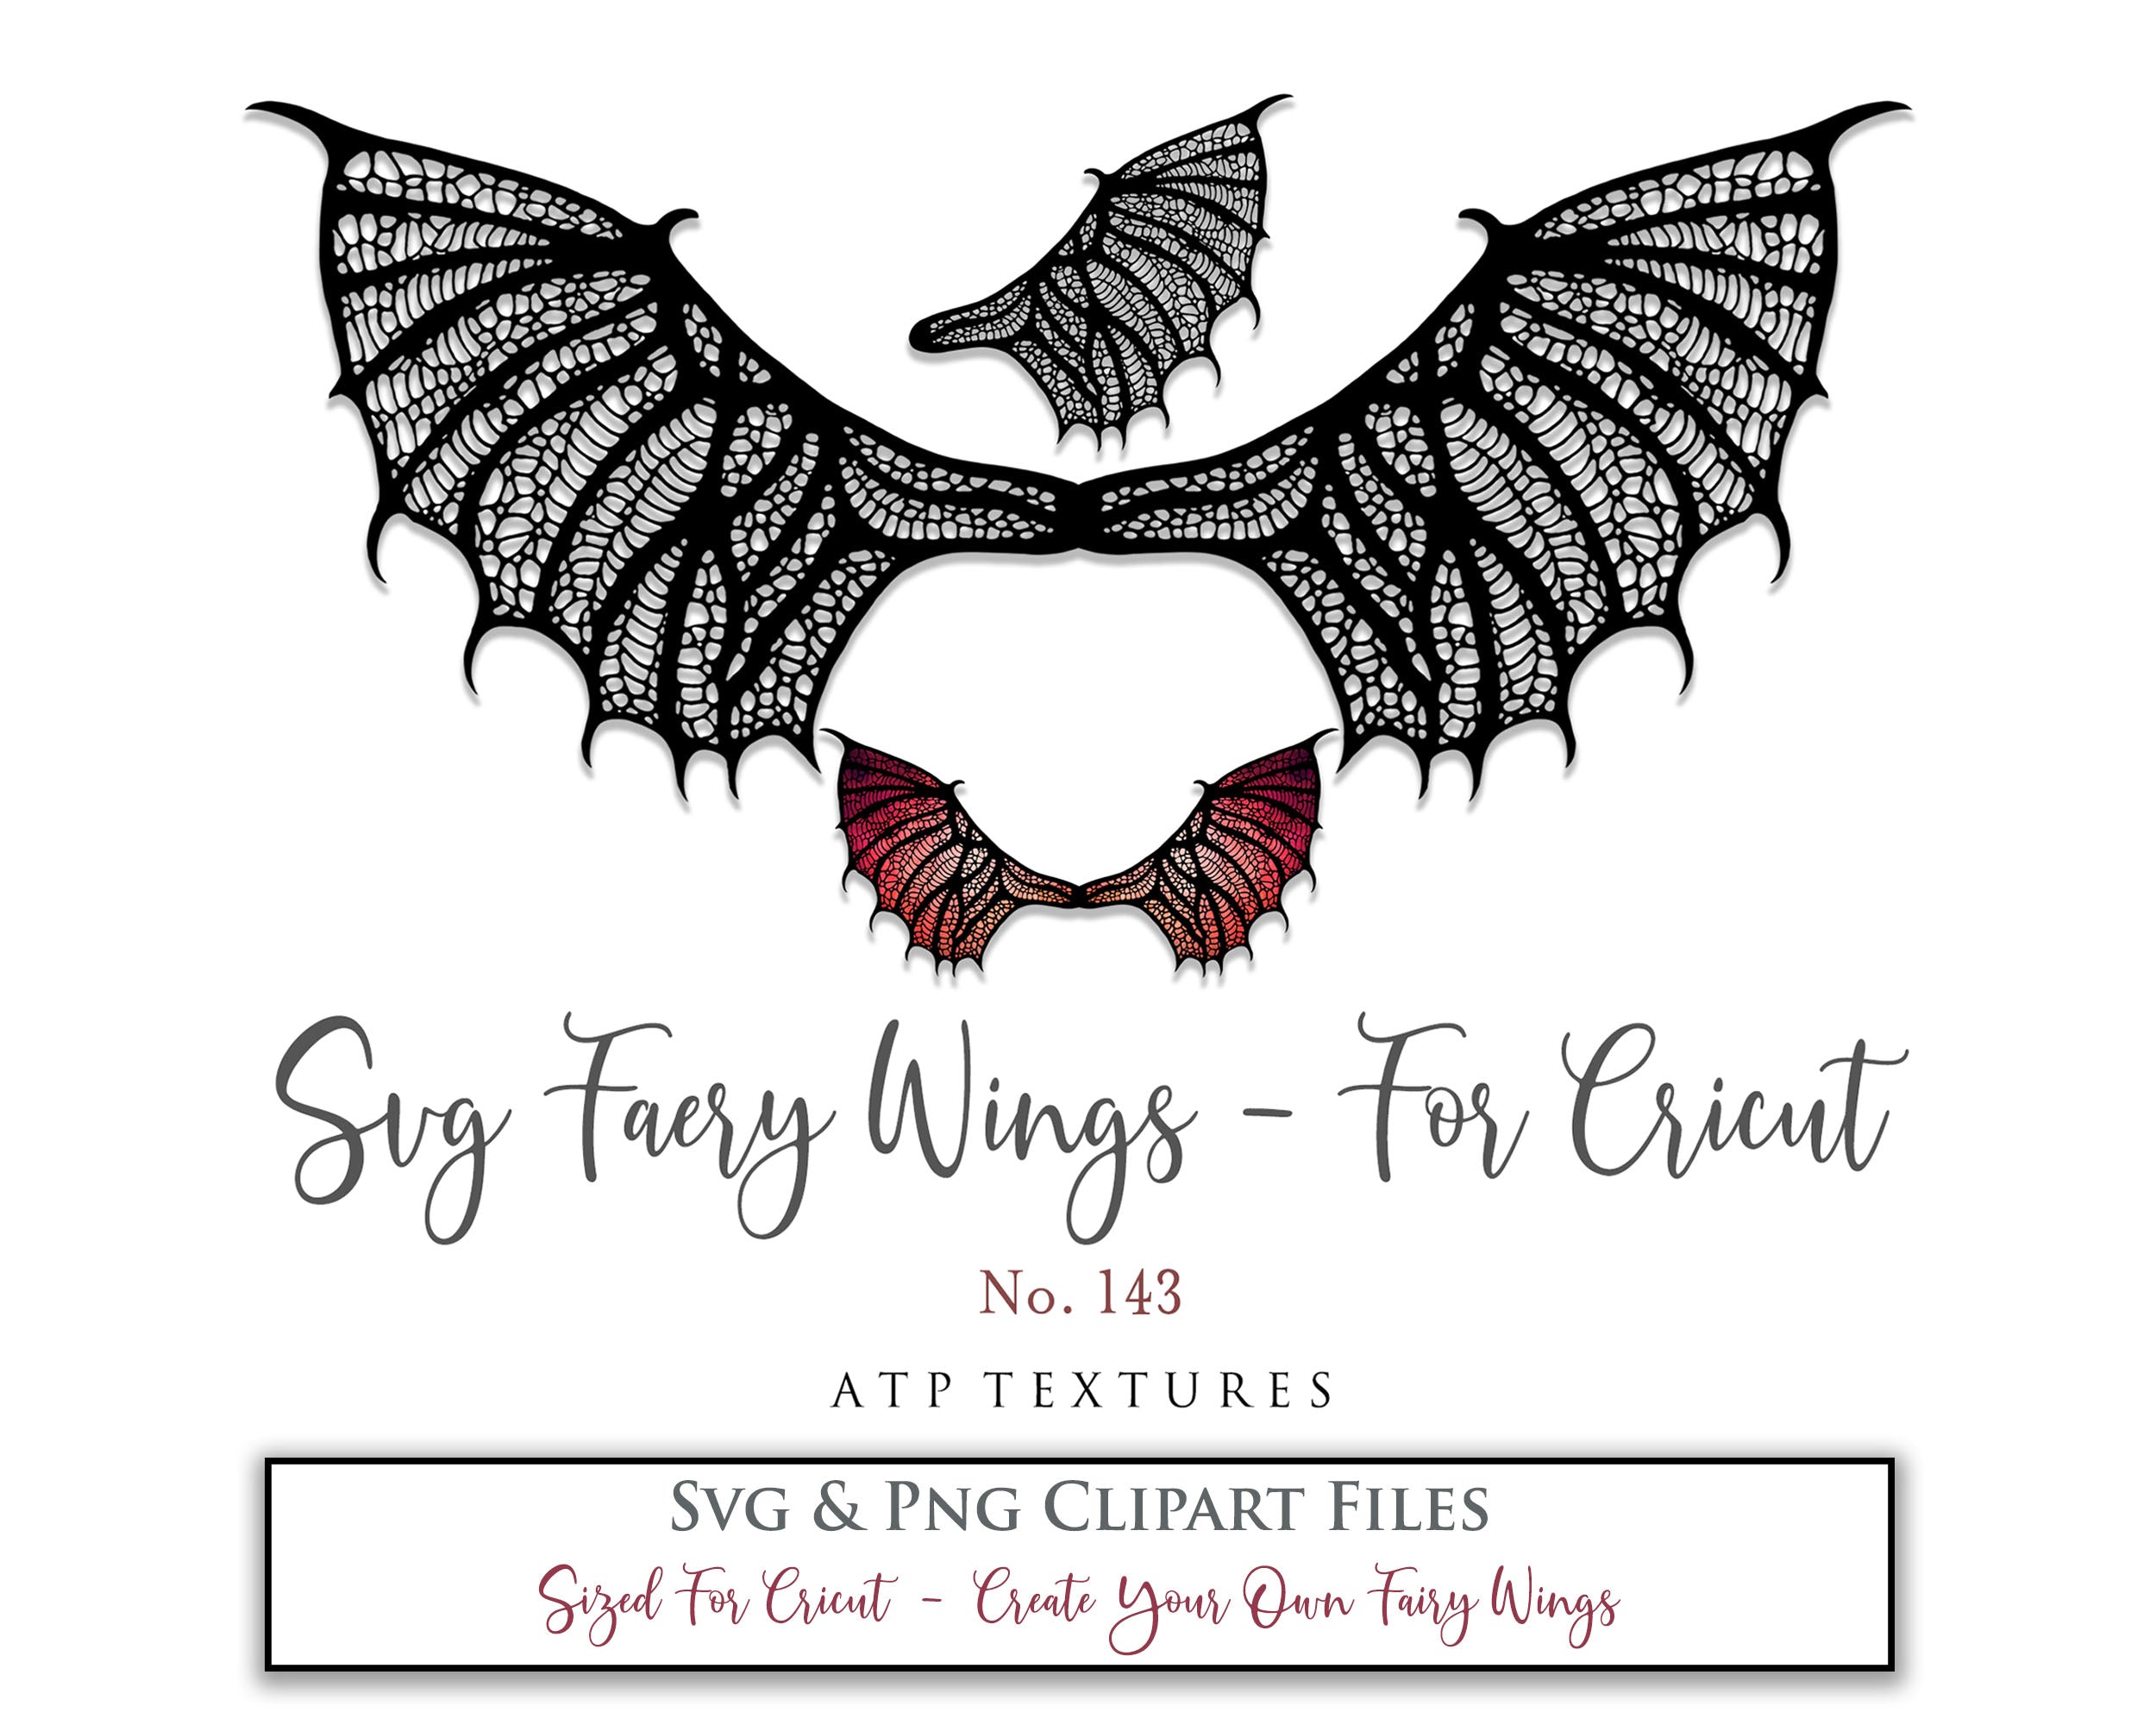 SVG & PNG Fairy/Angel Wing files for Cricut, Silhouette Cameo and other Cutting Machines. Create wearable fairy wings, all sizes. Perfect for Halloween Costumes, Fantasy, Cosplay, Photography. Prints, Wedding, Engagement, Baby Shower invitations, Sublimation Printing, Clip Art and more. Cut and assemble. ATP Textures. 